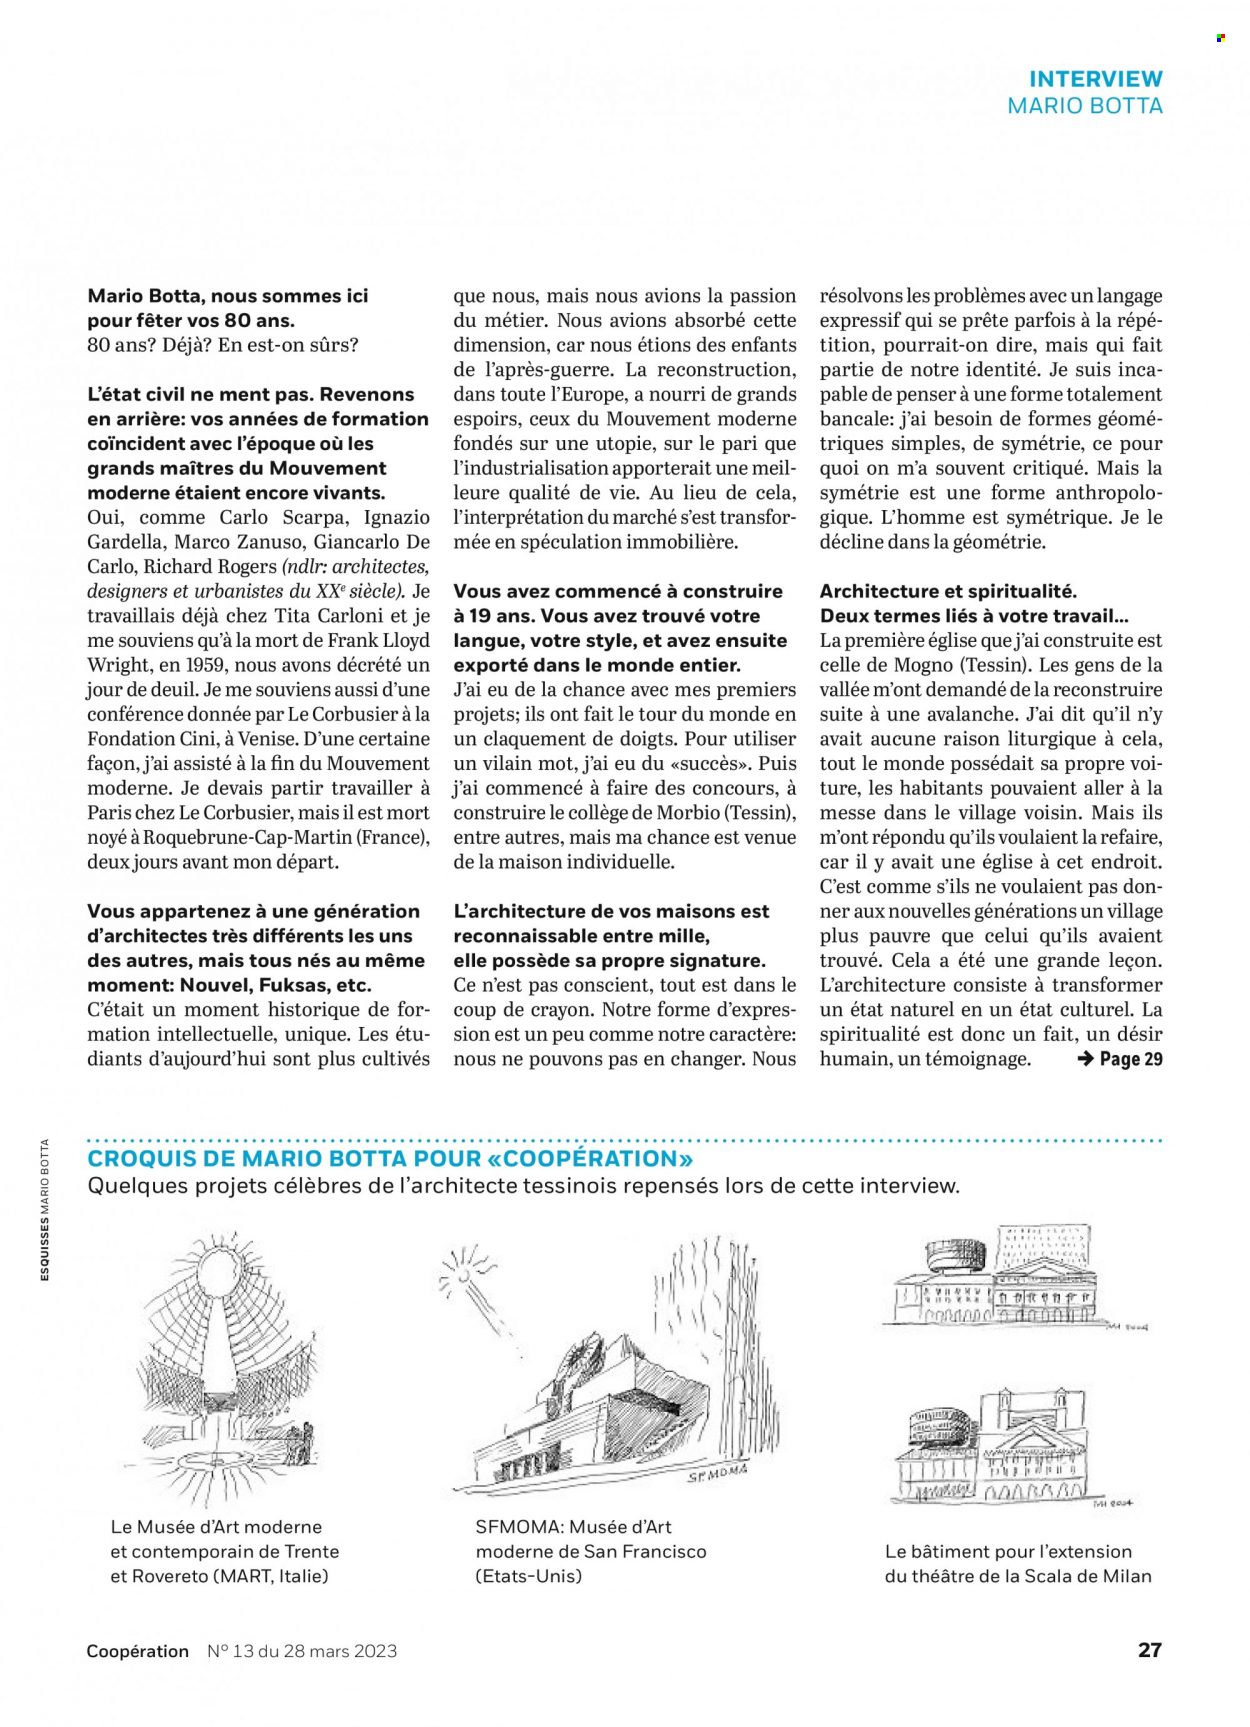 Catalogue Coop - 28.3.2023 - 3.4.2023. Page 27.